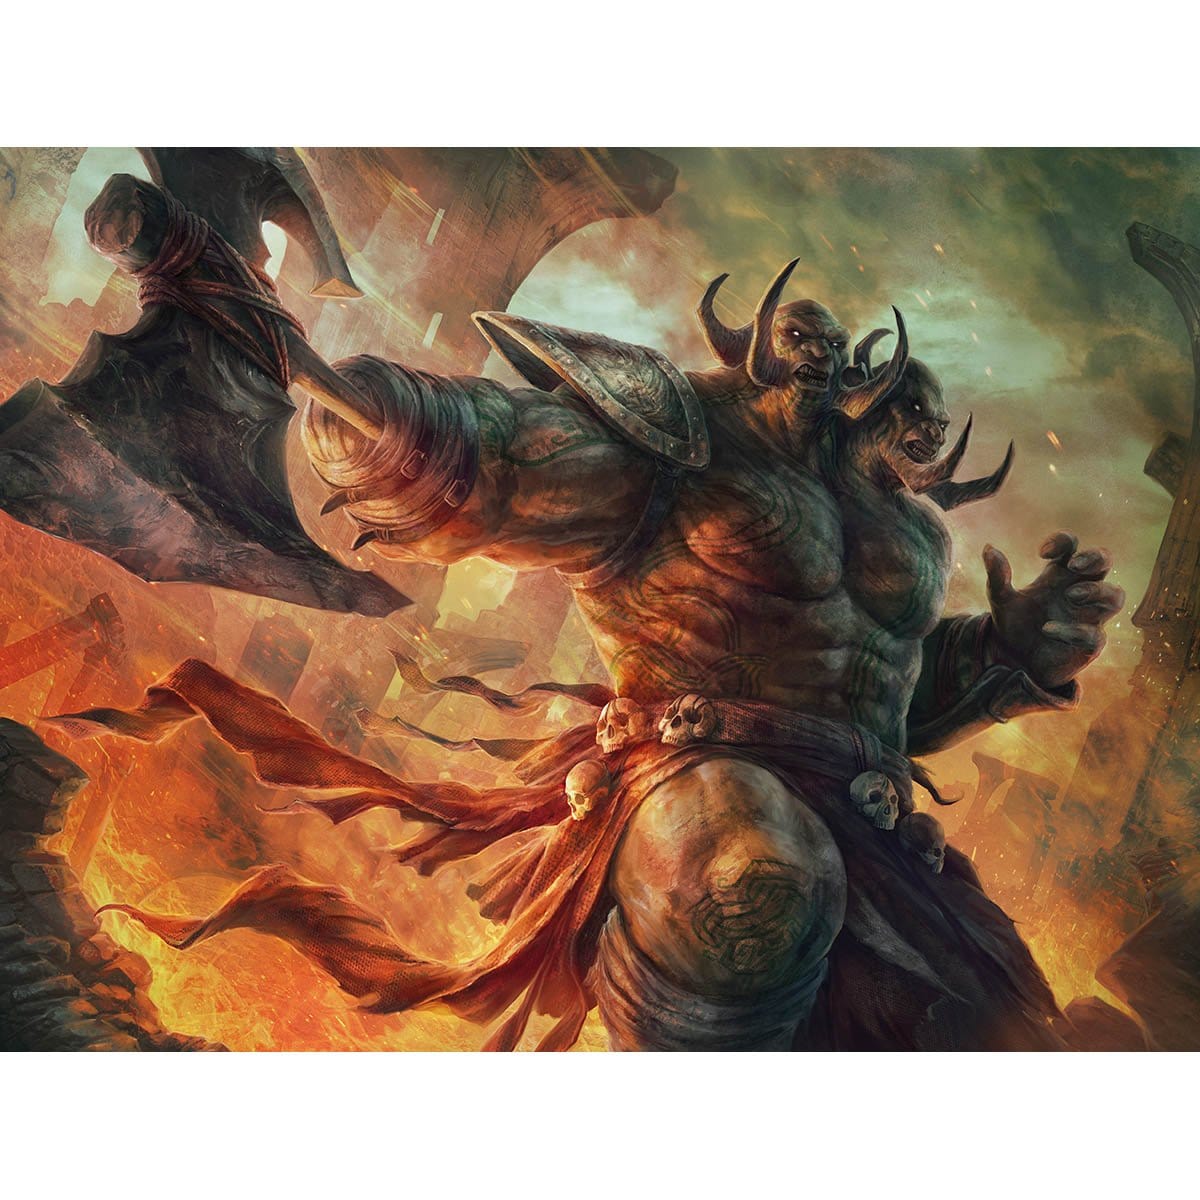 Ruric Thar, the Unbowed Print - Print - Original Magic Art - Accessories for Magic the Gathering and other card games